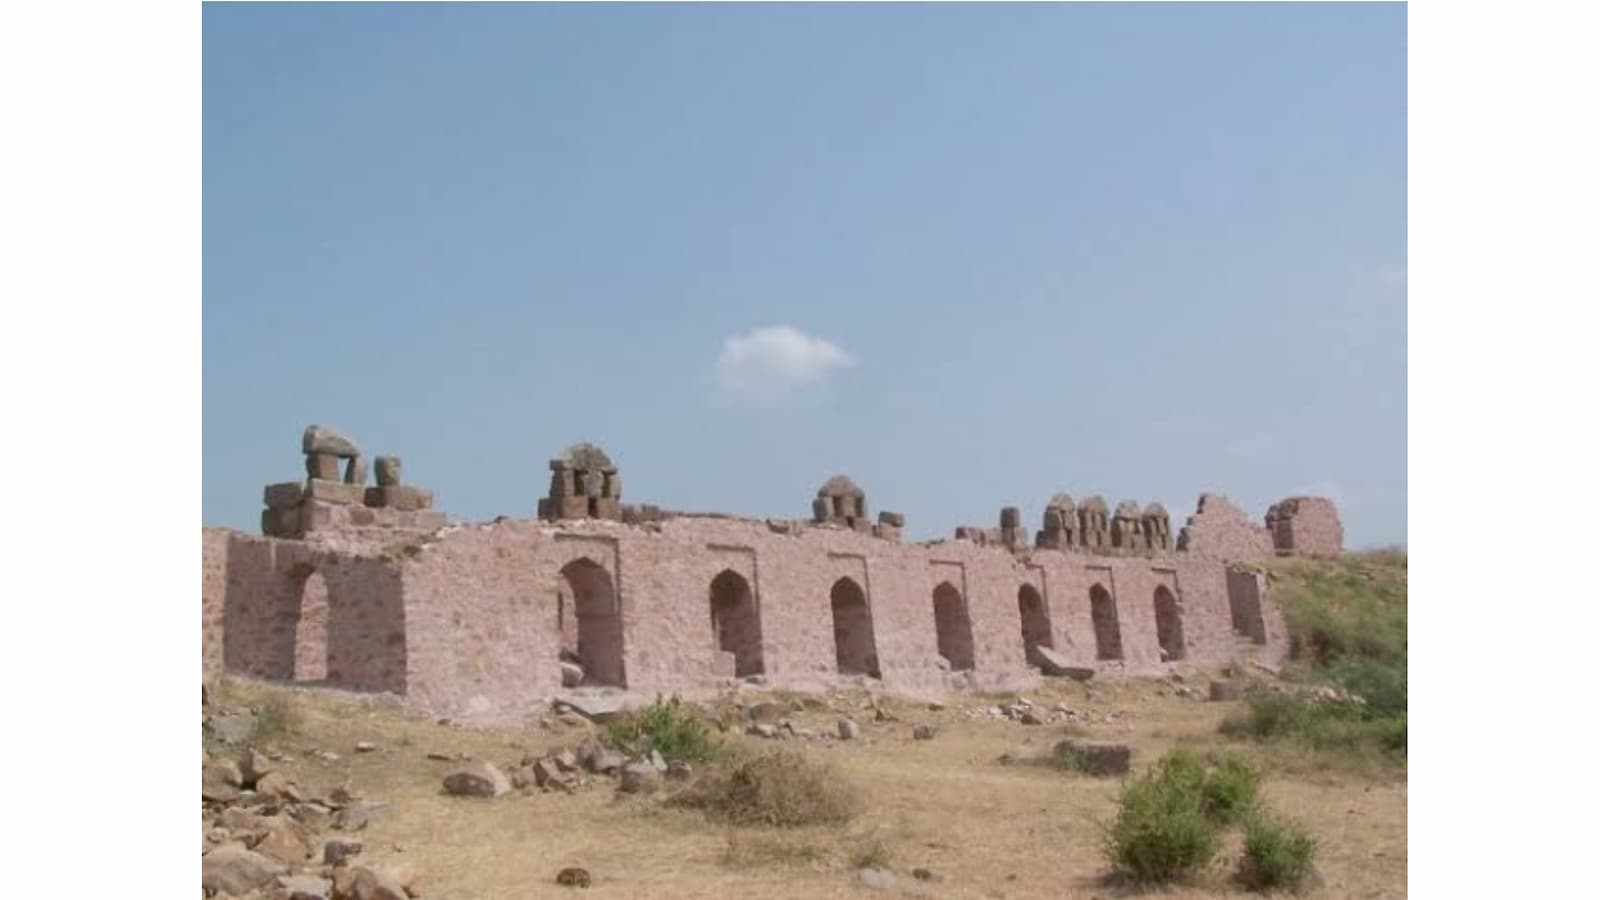 An image of the Lal Kot, the oldest fort in Delhi